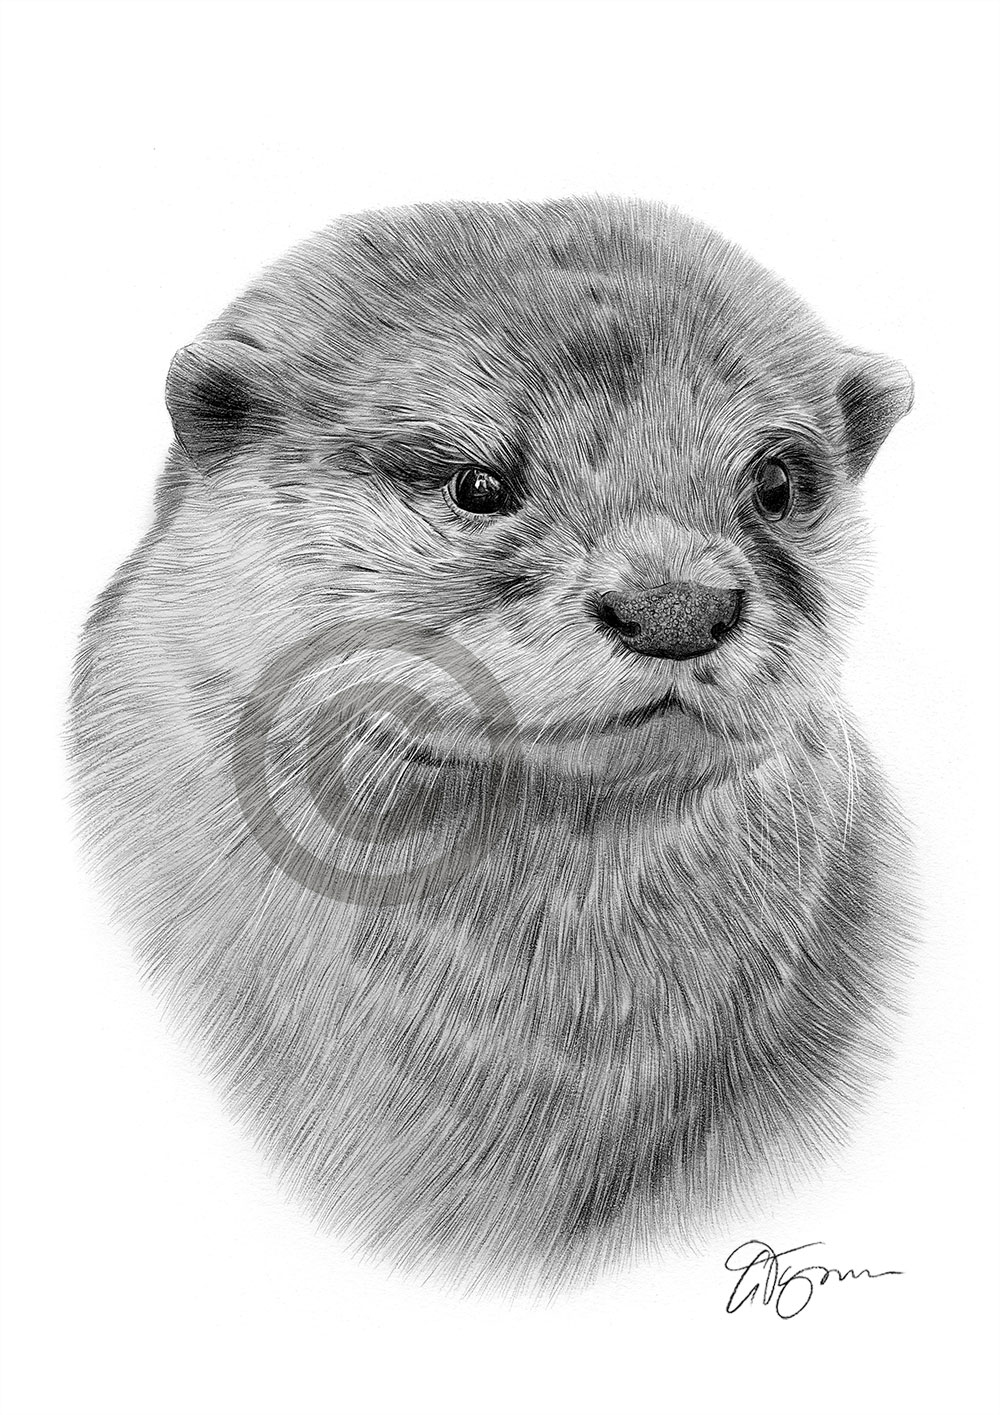 Pencil drawing of an otter by artist Gary Tymon